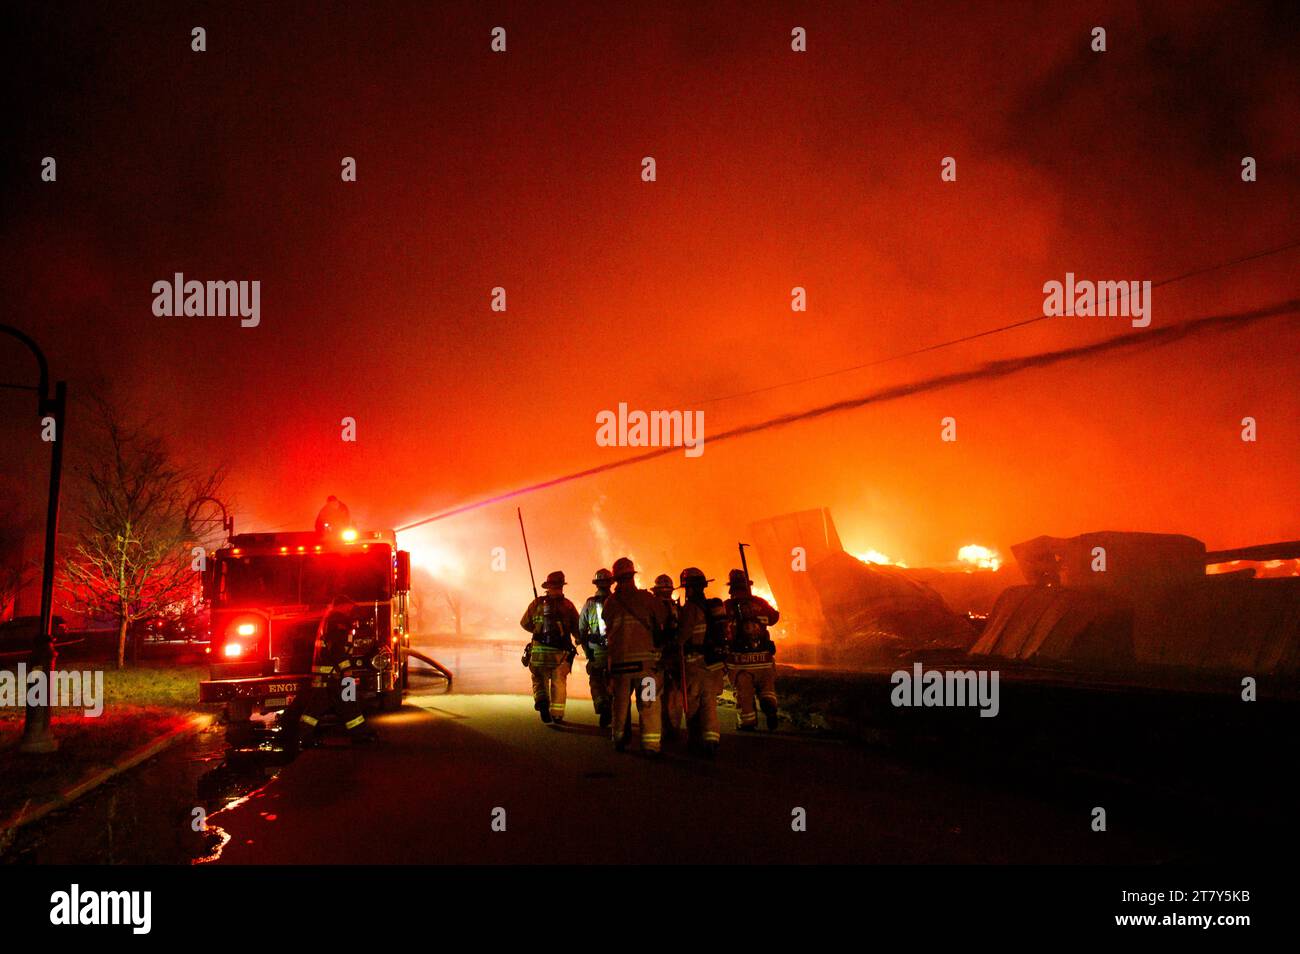 Fire fighters firemen in action to fight a spectacular blaze at the RK Miles lumberyard in Montpelier, VT, New England, USA. Stock Photo